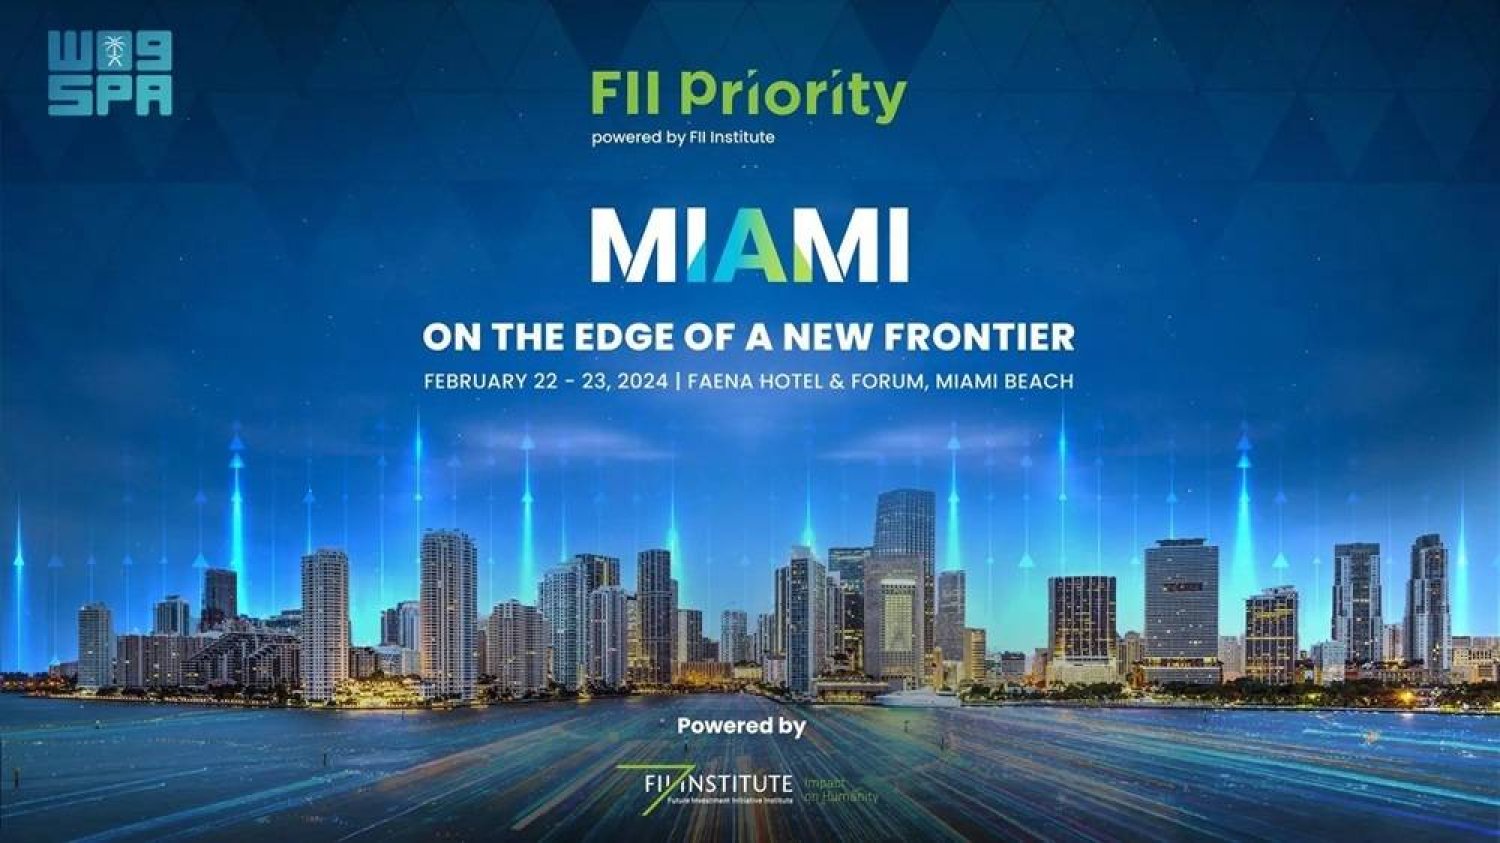 FII Institute PRIORITY Summit to Be Held in US on February 22-23